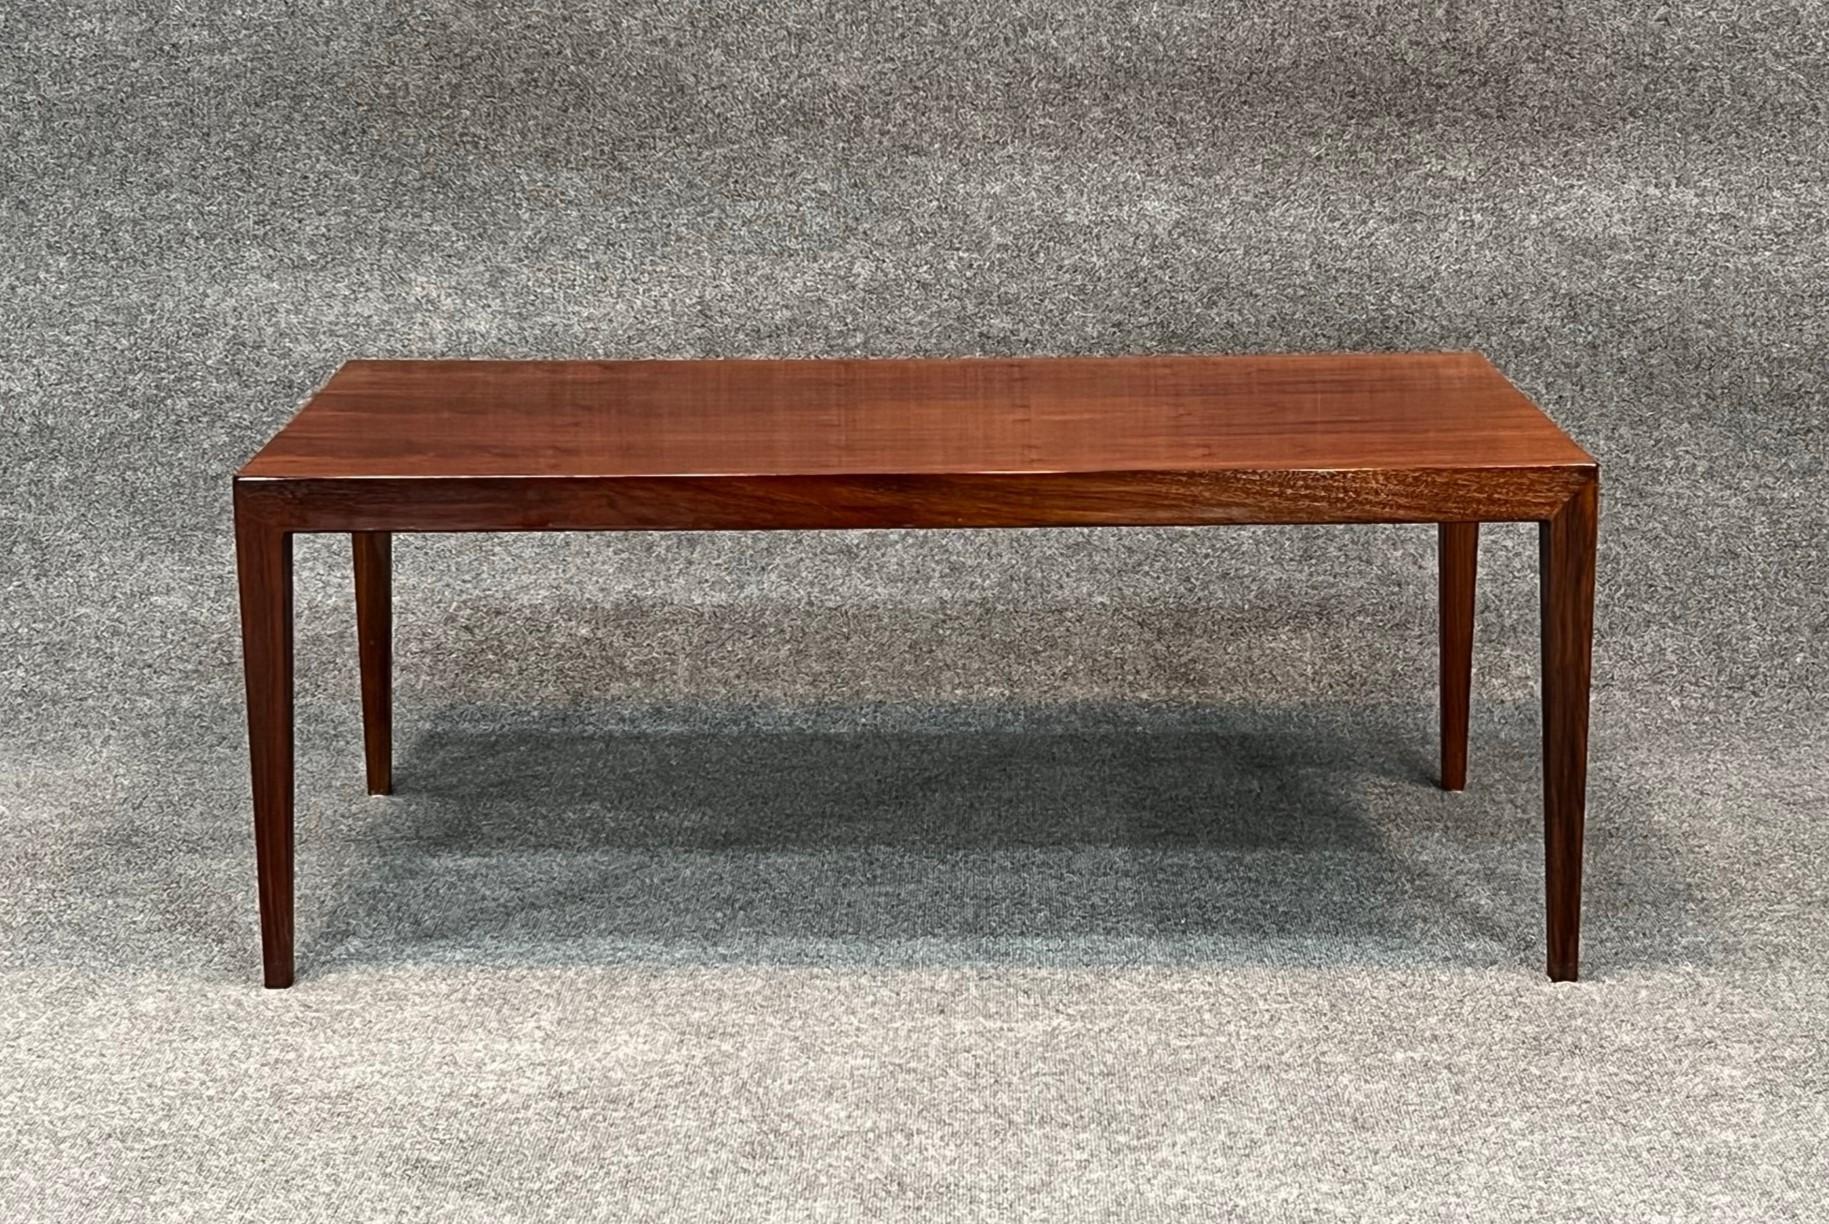 Mid-Century Danish Modern Rosewood Coffee Table, Severin Hansen, Denmark, 1960s.  This table's design is distinctively Severin Hansen, with its angular legs and clean modern design. 